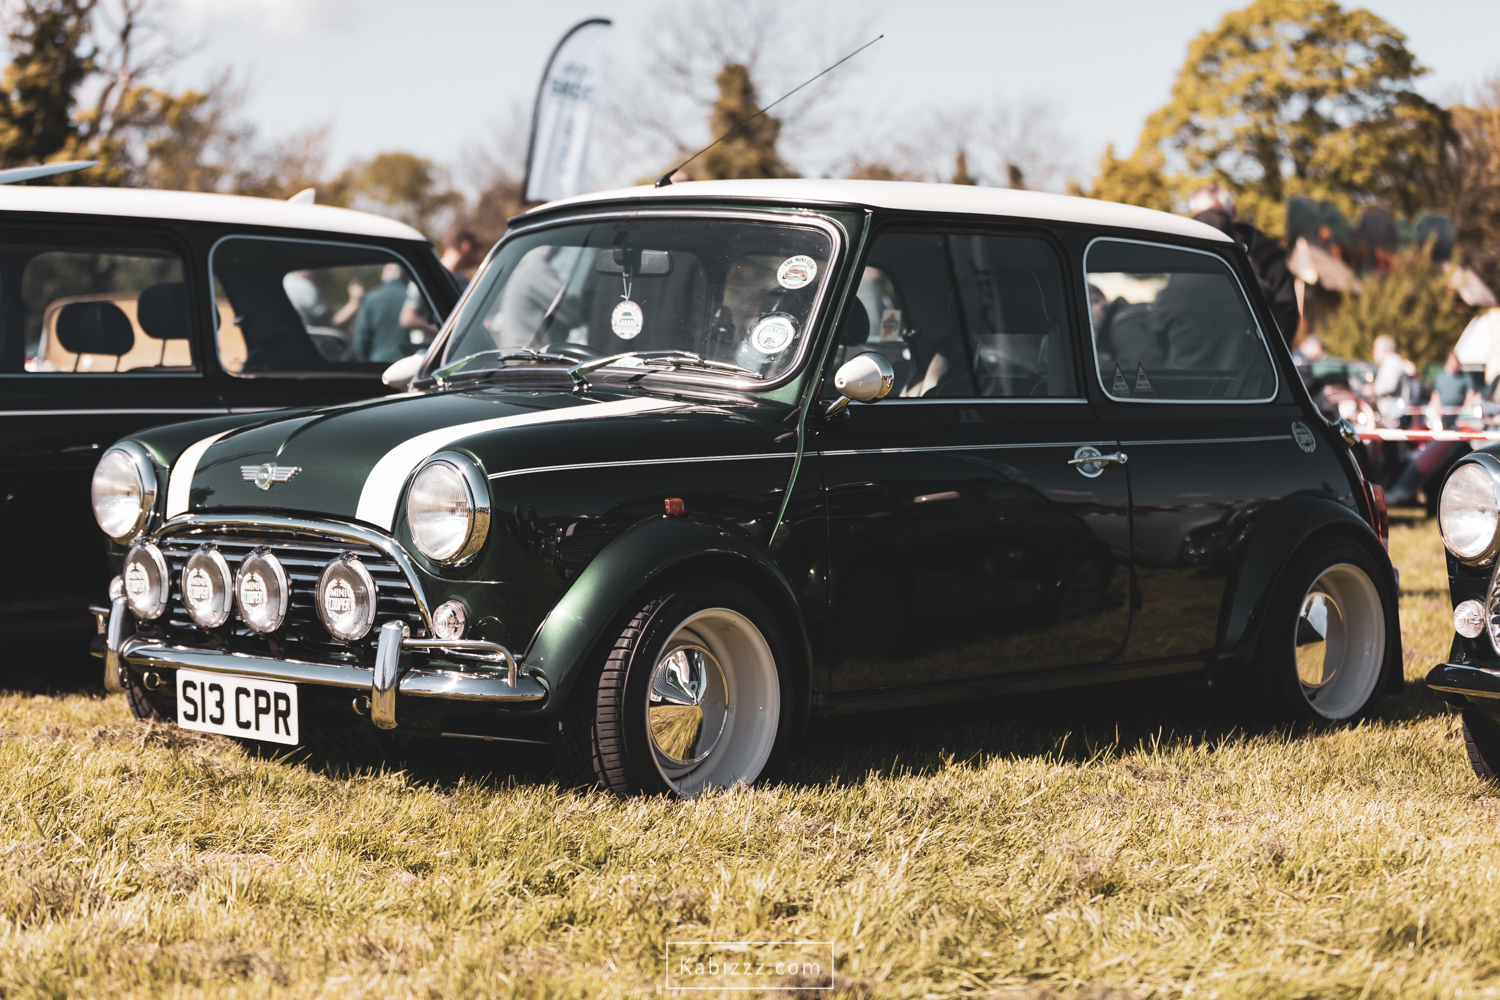 Kabizzz_Photography_Stirling_District_Classic _cars-8.jpg